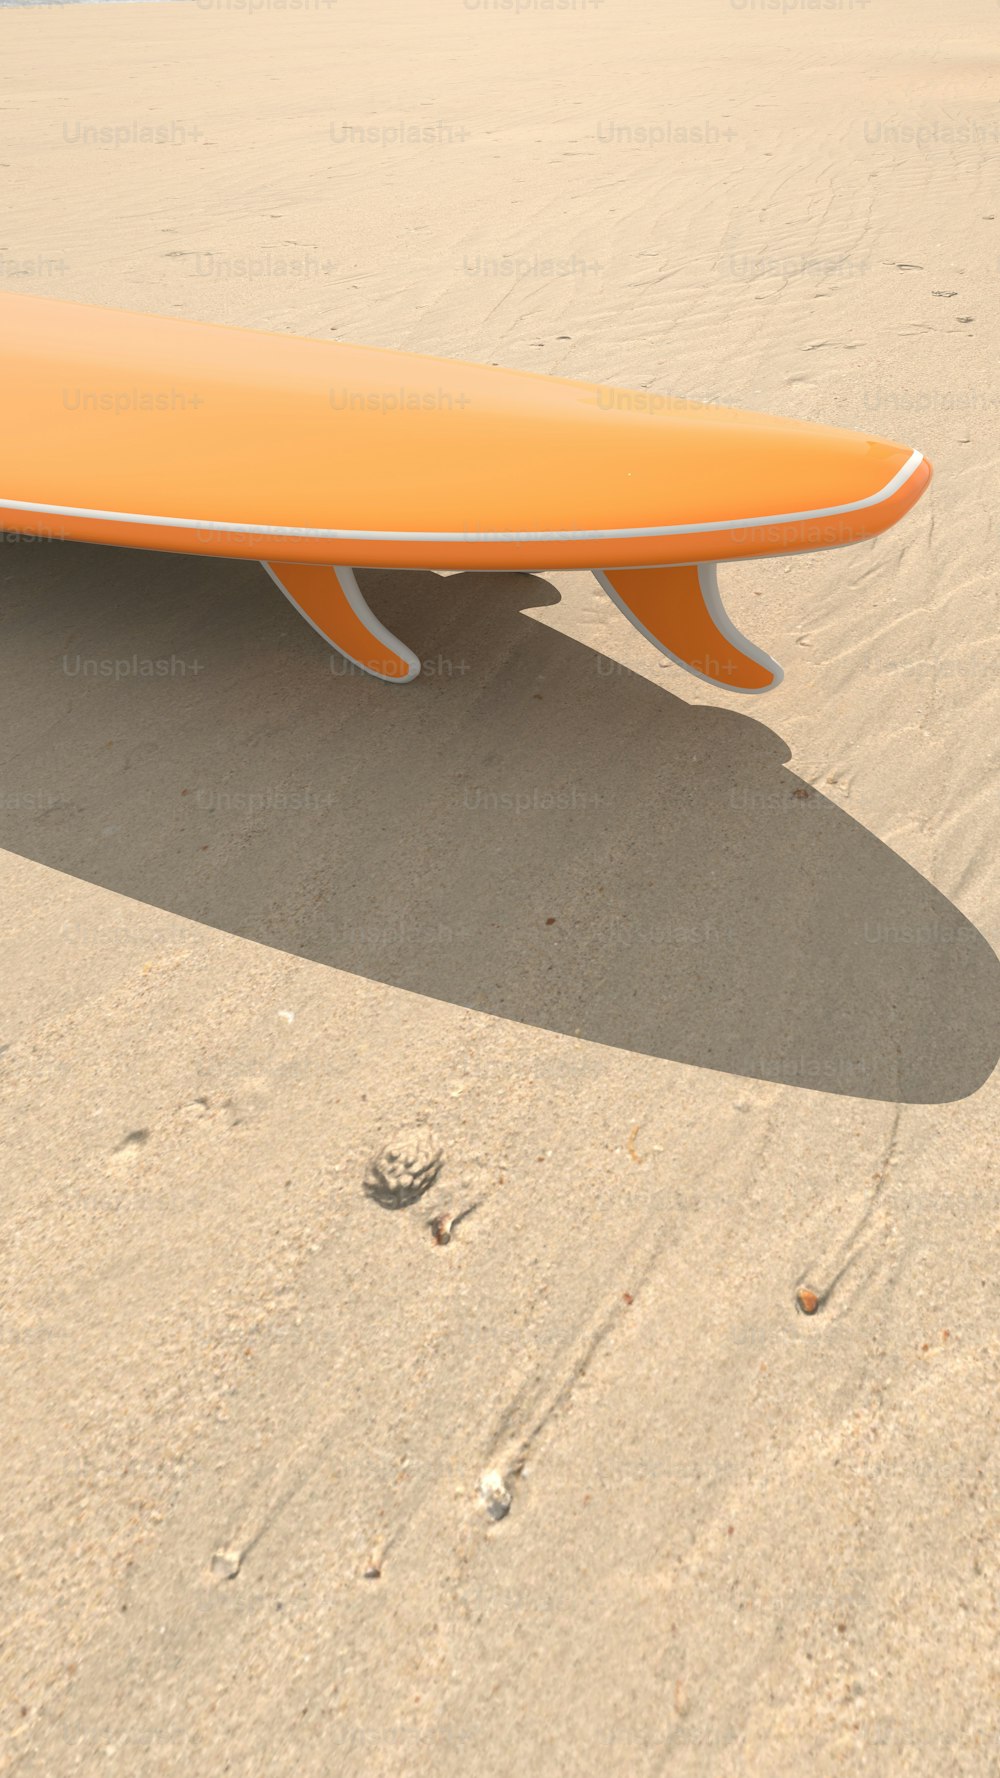 a surfboard laying on top of a sandy beach